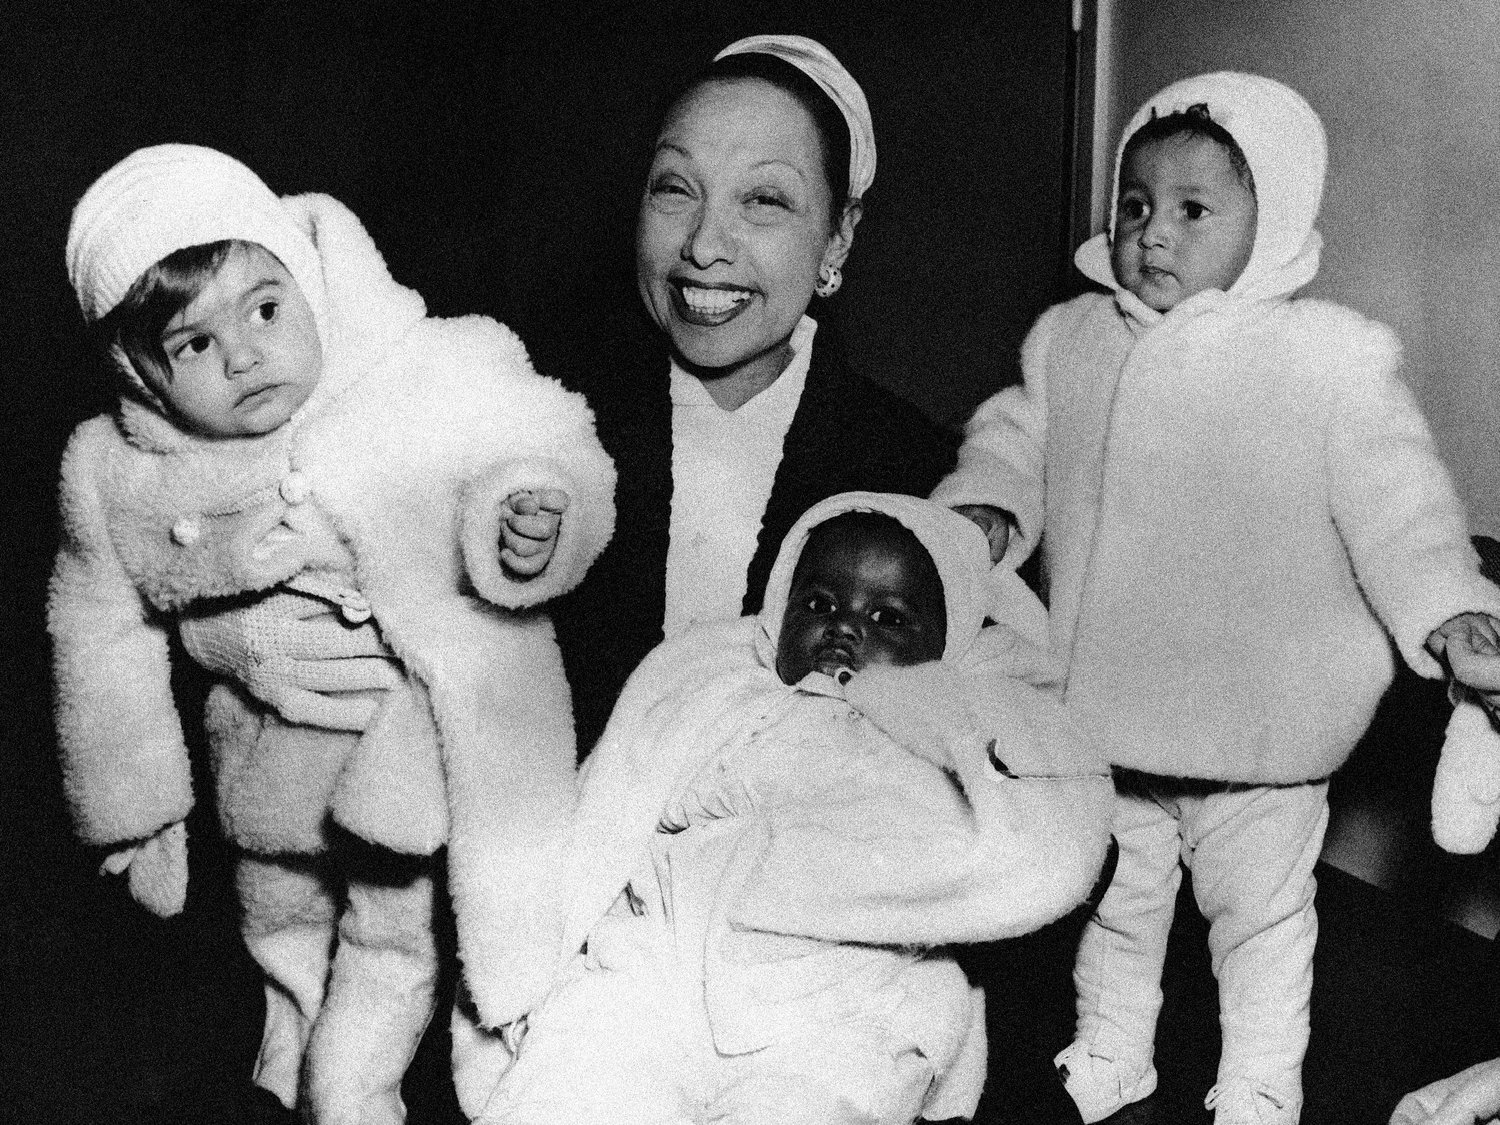 FILE- Actress Josephine Baker in her apartment at the Hotel Forresta near Stockholm, Sweden on Dec. 7, 1957, with three of her adopted children, Marianne, left, Koffi, center, and Brahim. France is inducting Josephine Baker ‚Äì Missouri-born cabaret dancer, French Resistance fighter and civil rights leader ‚Äì into its Pantheon, the first Black woman honored in the final resting place of France's most revered luminaries. (AP Photo, File)